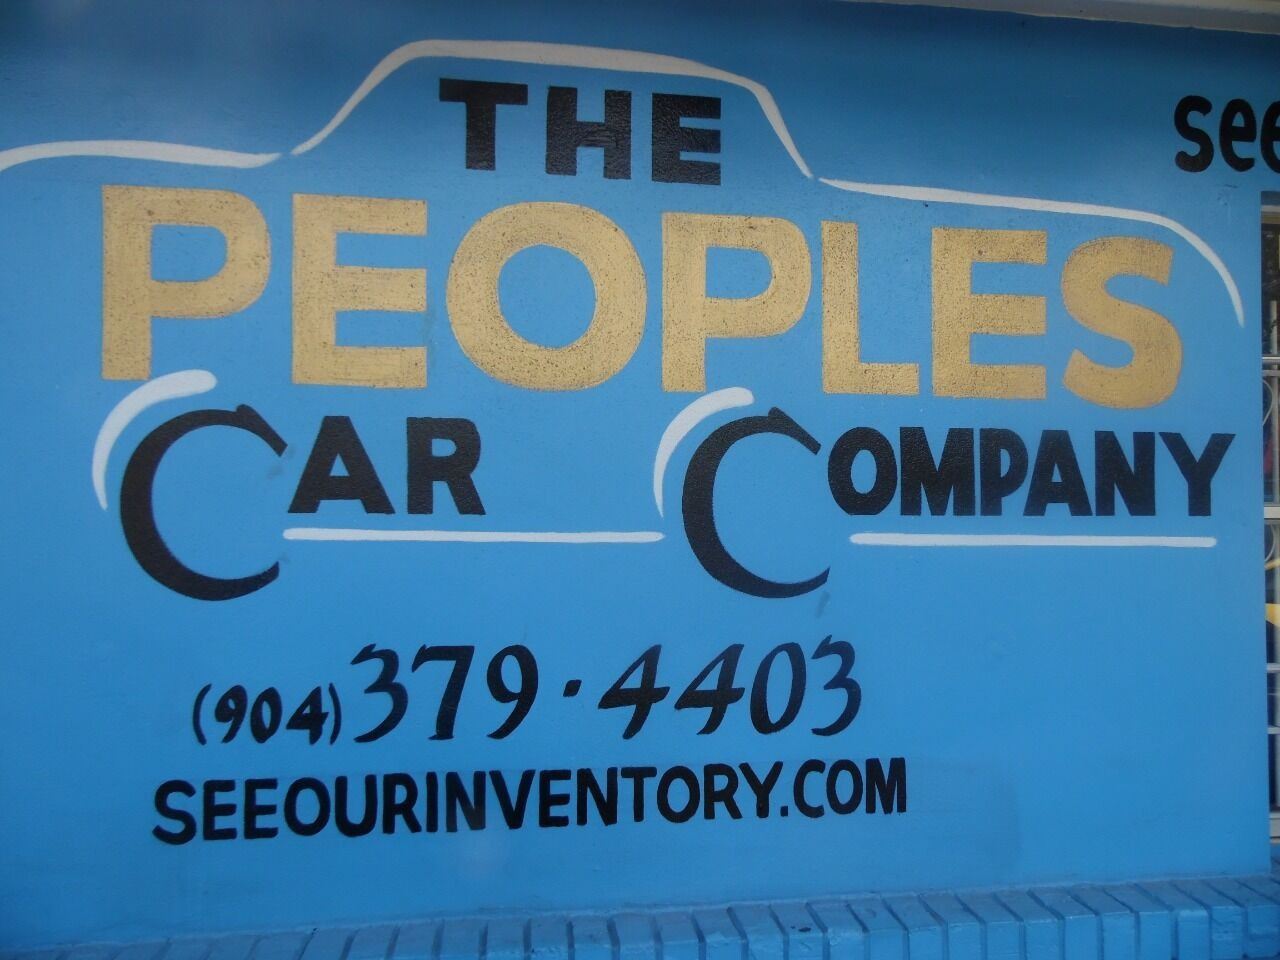 The Peoples Car Company